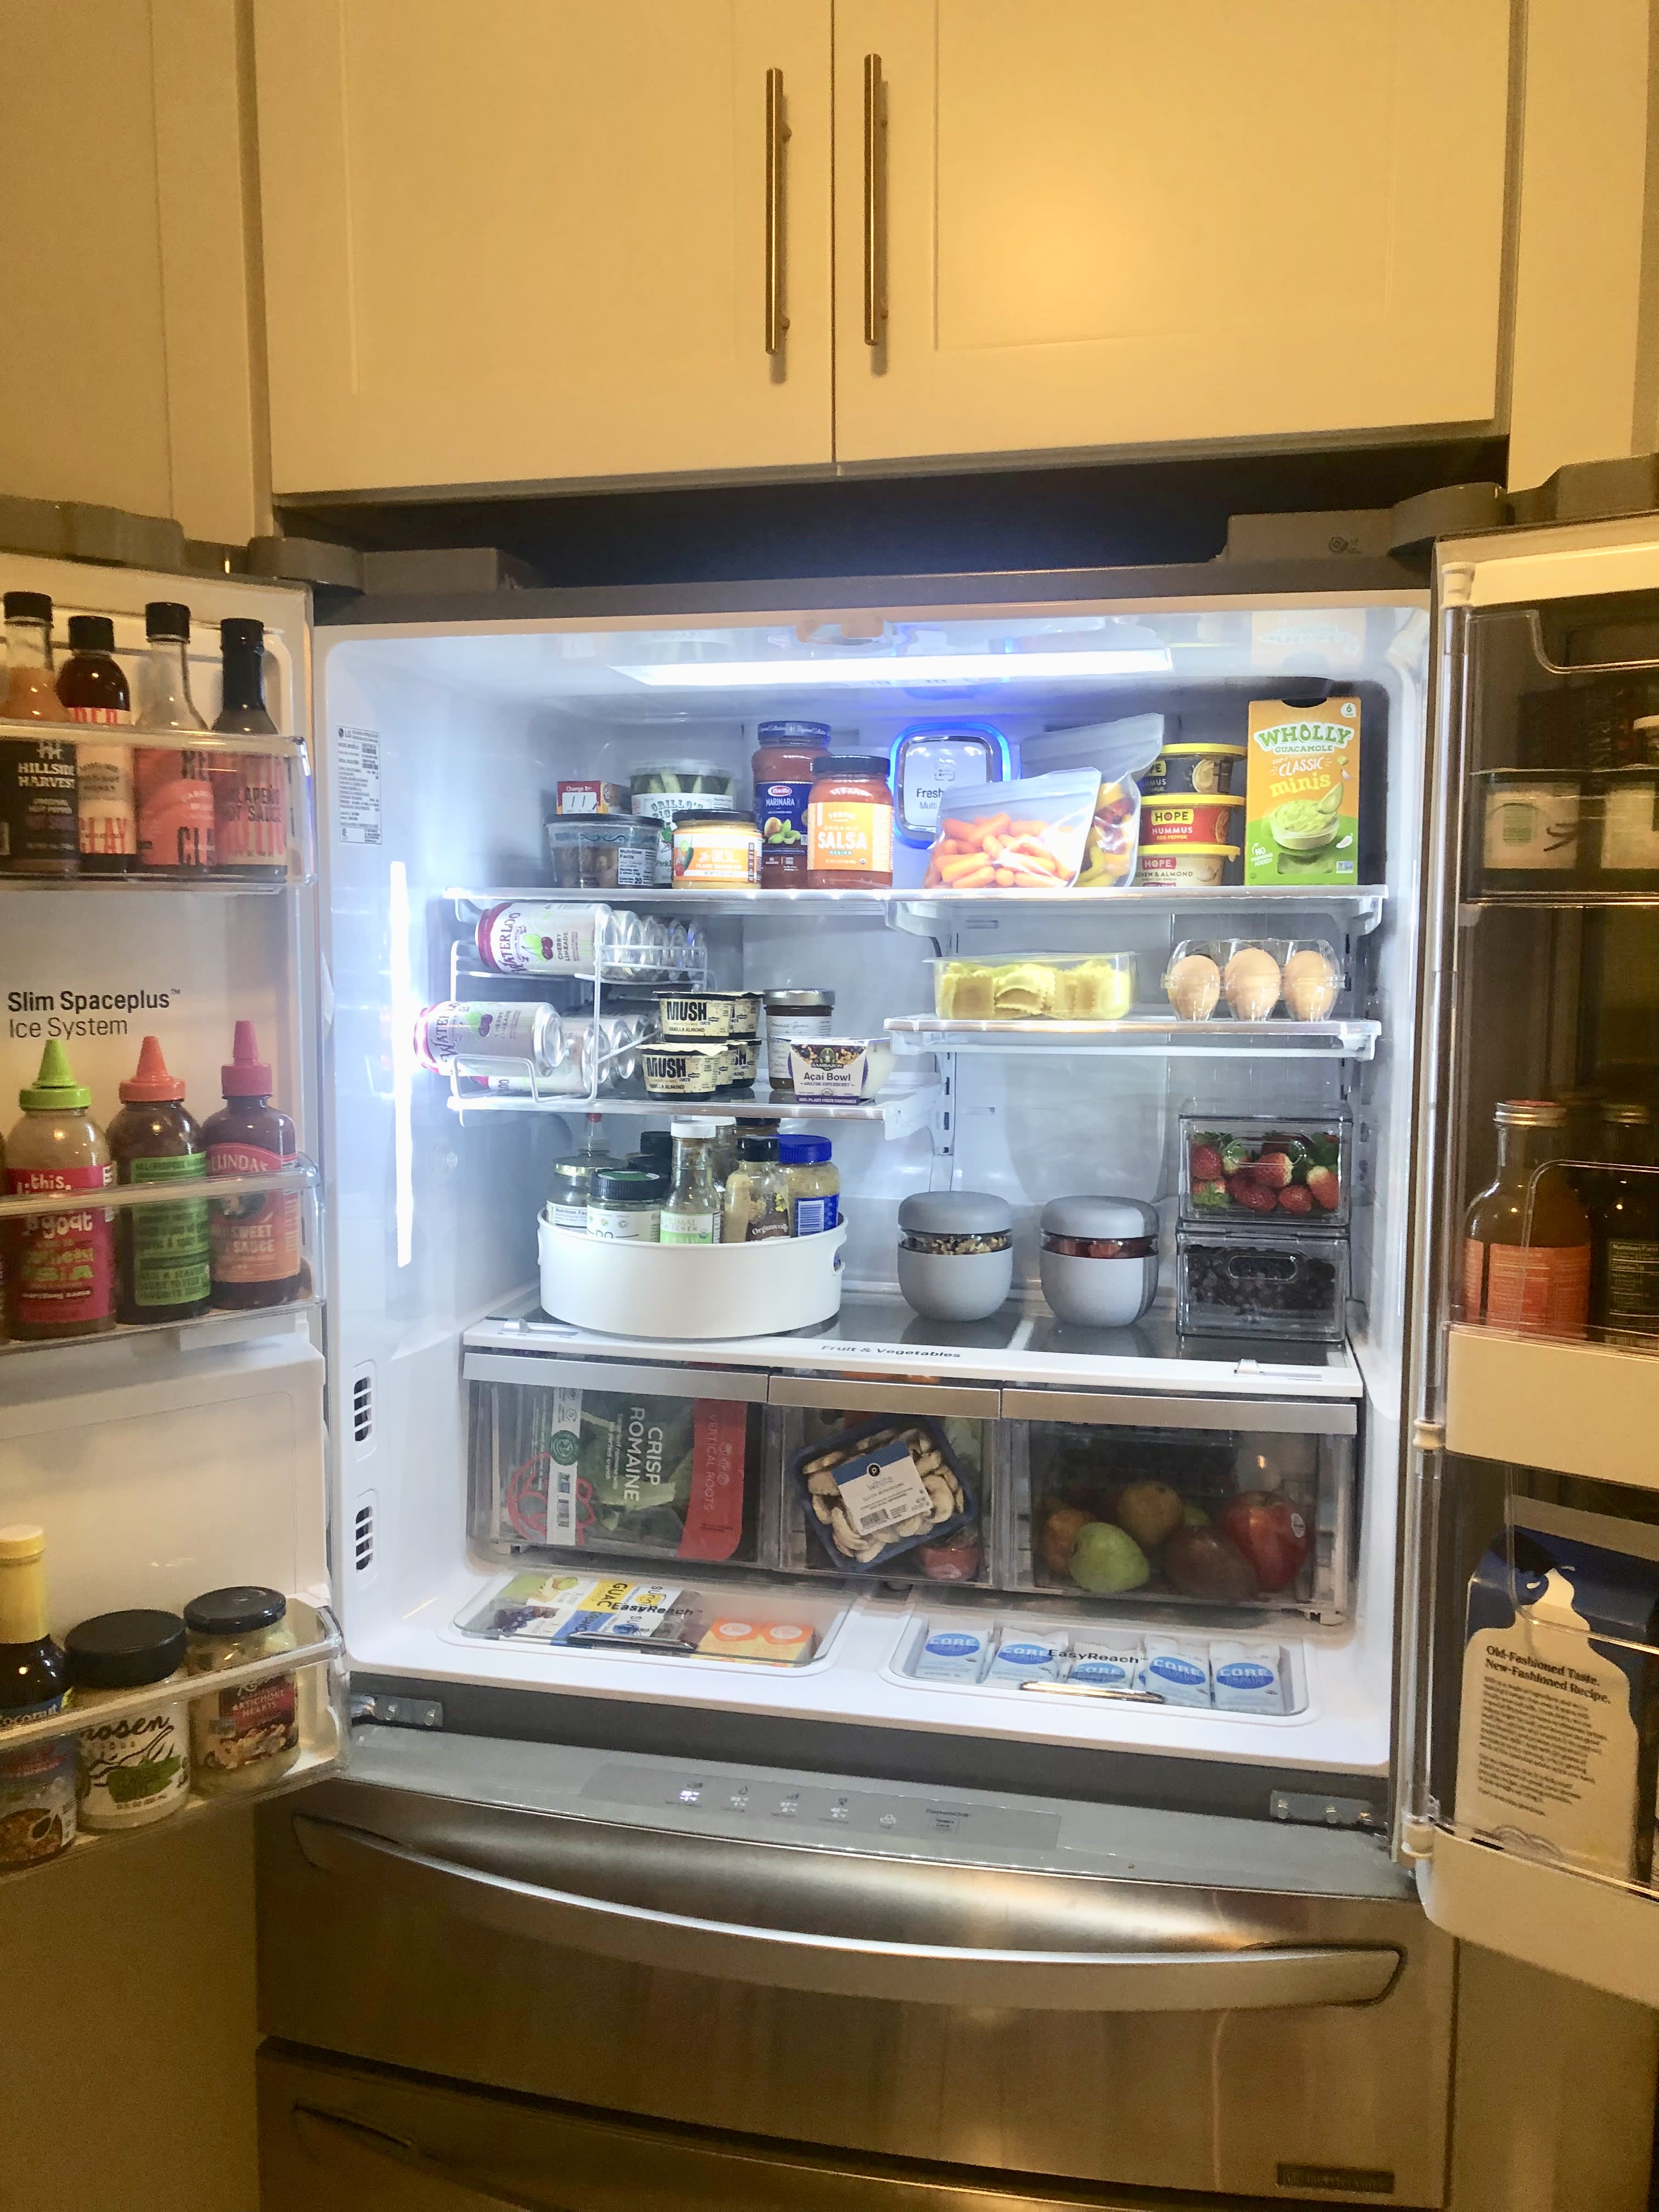 The Easiest Way to Organize Your Pantry & Refrigerator –